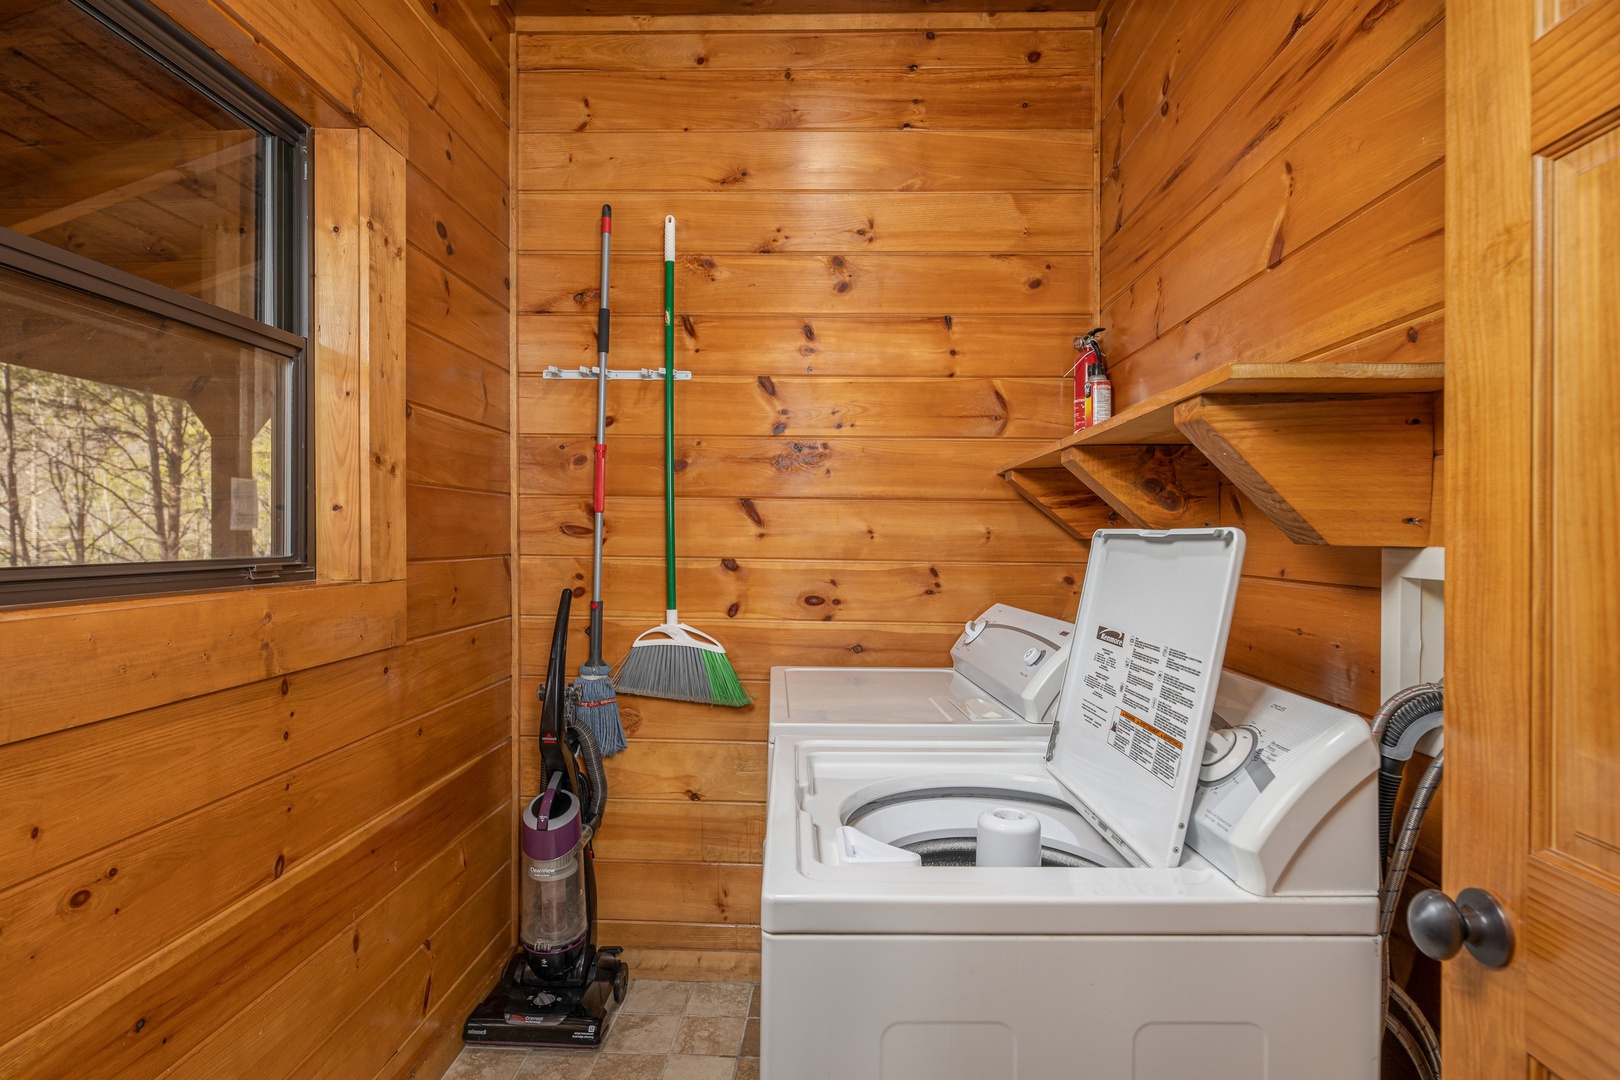 Laundry room at King of the Mountain, a 3 bedroom cabin rental located in Pigeon Forge